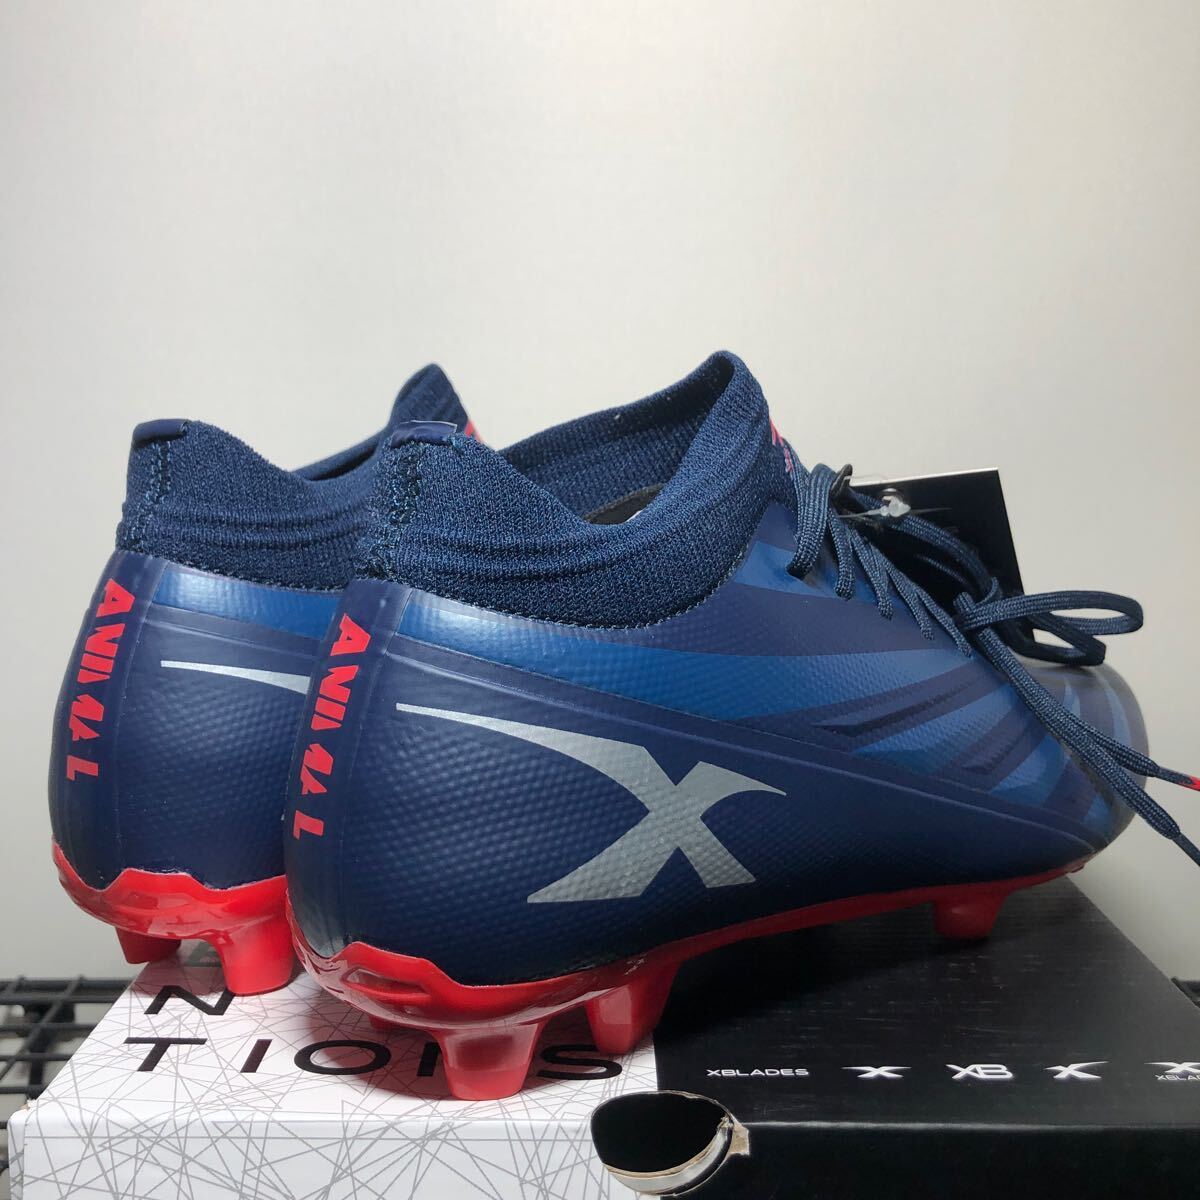 XBLADES X Blaze animal in stay nkto25.5cm rugby shoes rugby spike ANI-F20-M-NVY